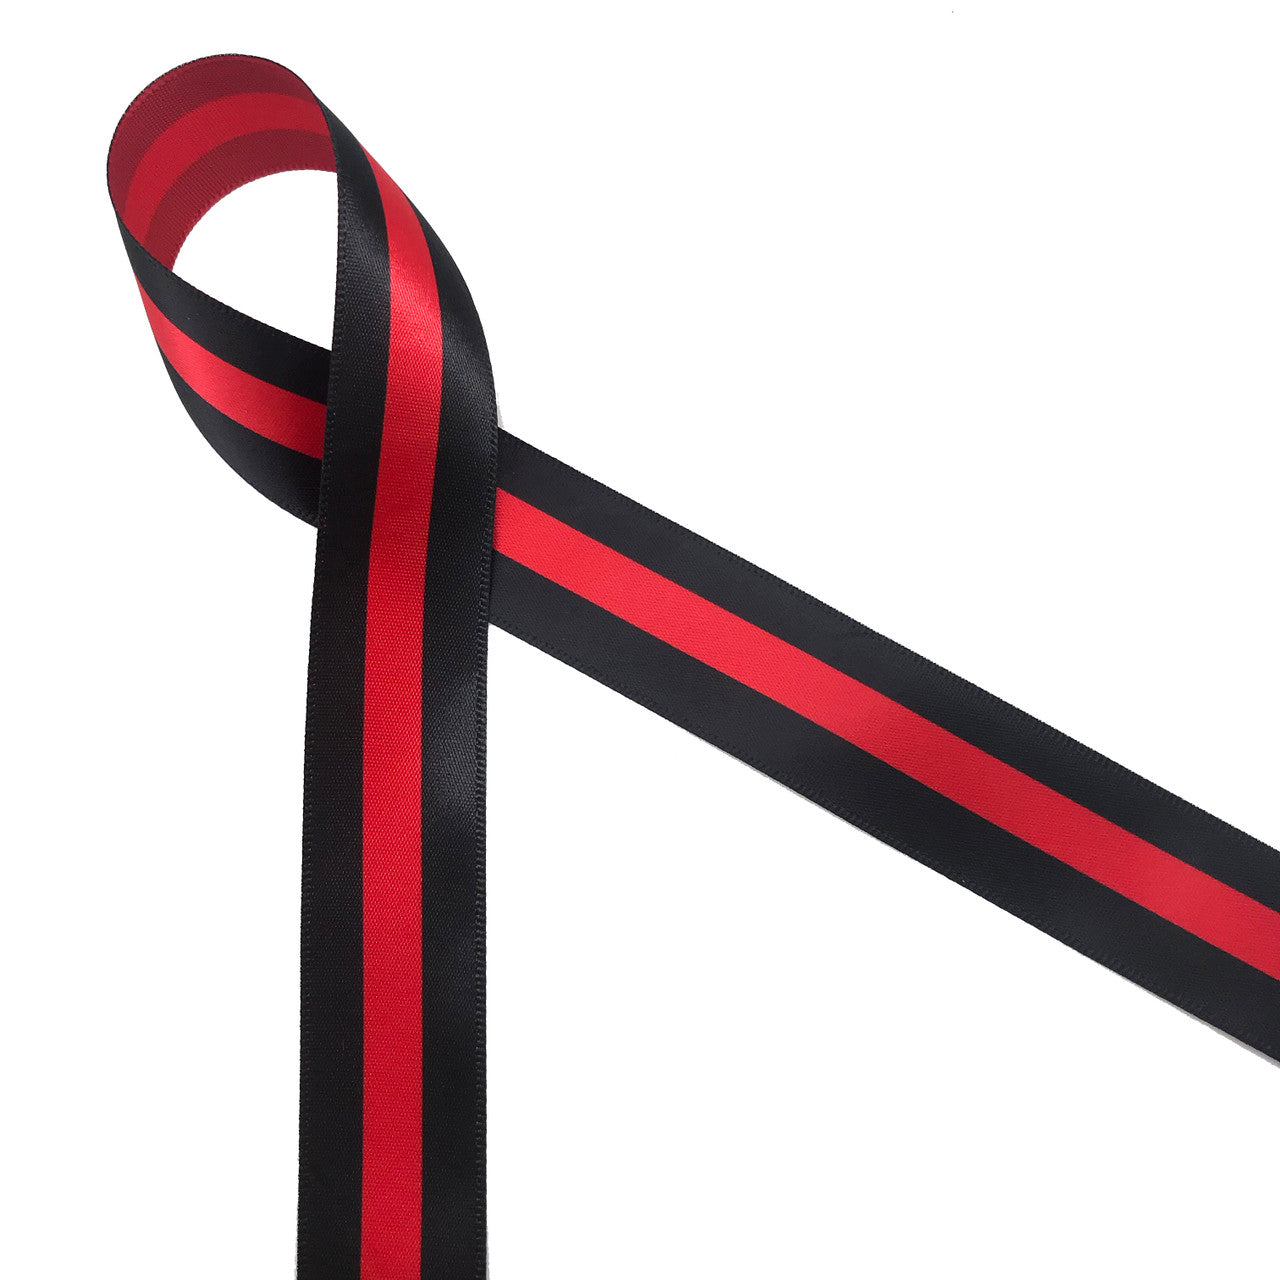  Red Ribbon 2 inch x 25 Yards Double Face Ribbons for